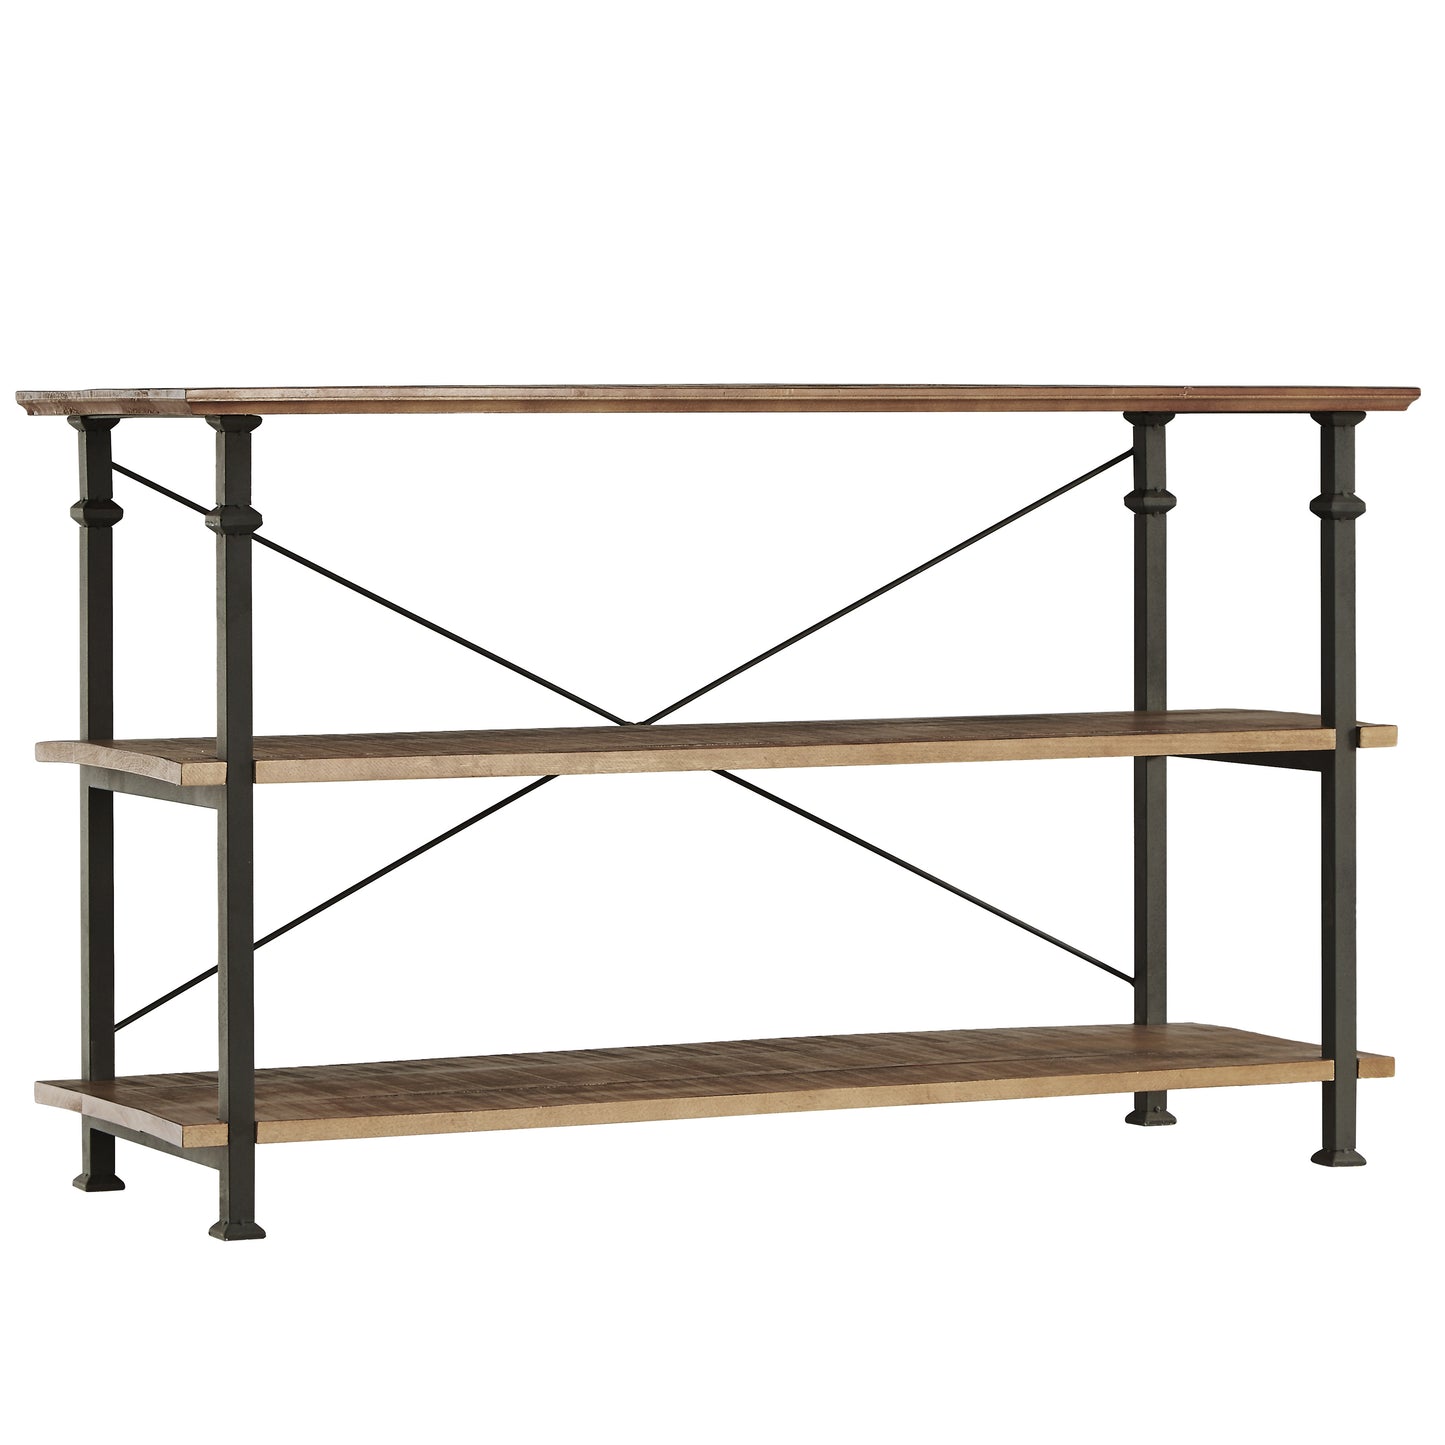 Factory 62" TV Stand ONE COLOR ONLY